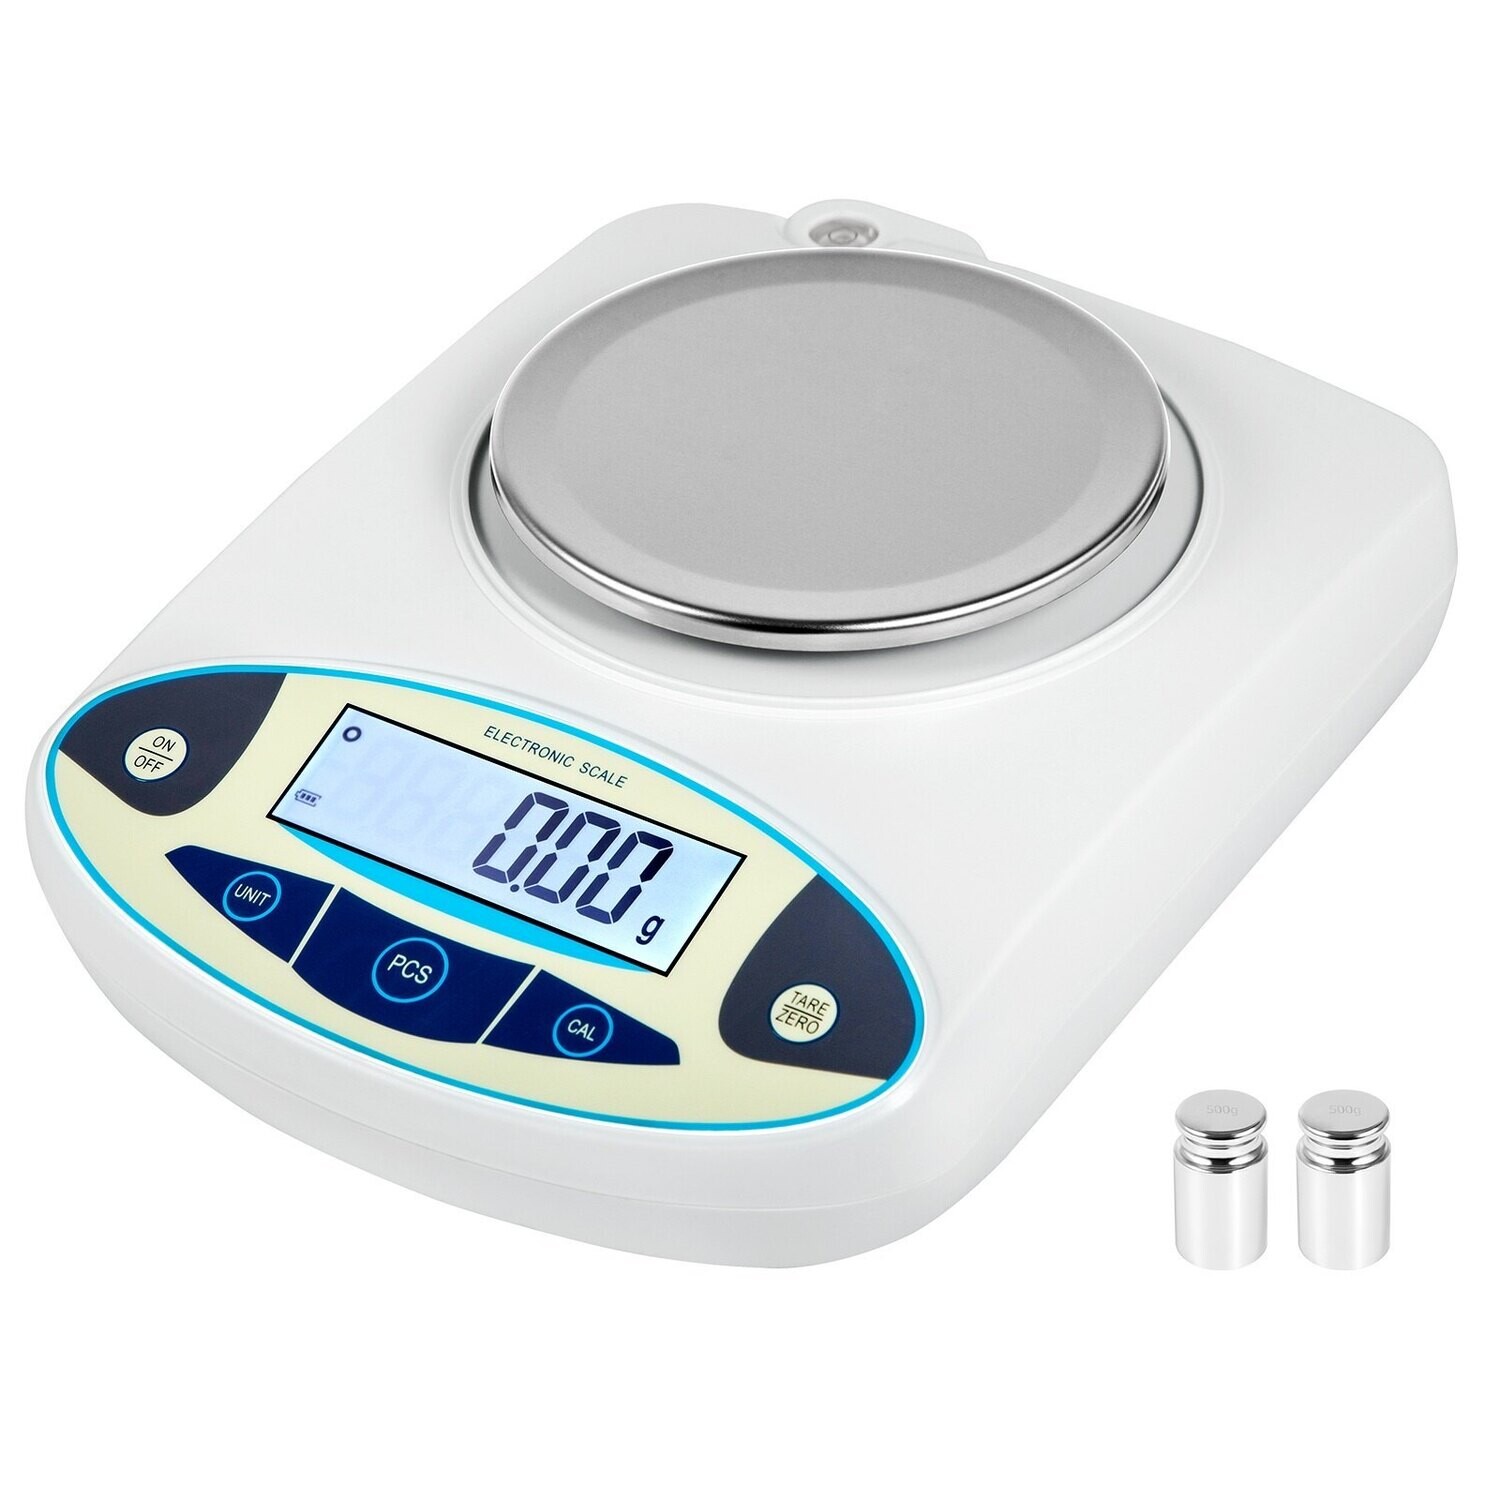 High Precision Electronic LCD Display Analytical Balance, 13 Units Conversion, Counting Function for Lab University (5000g, 0.01g)